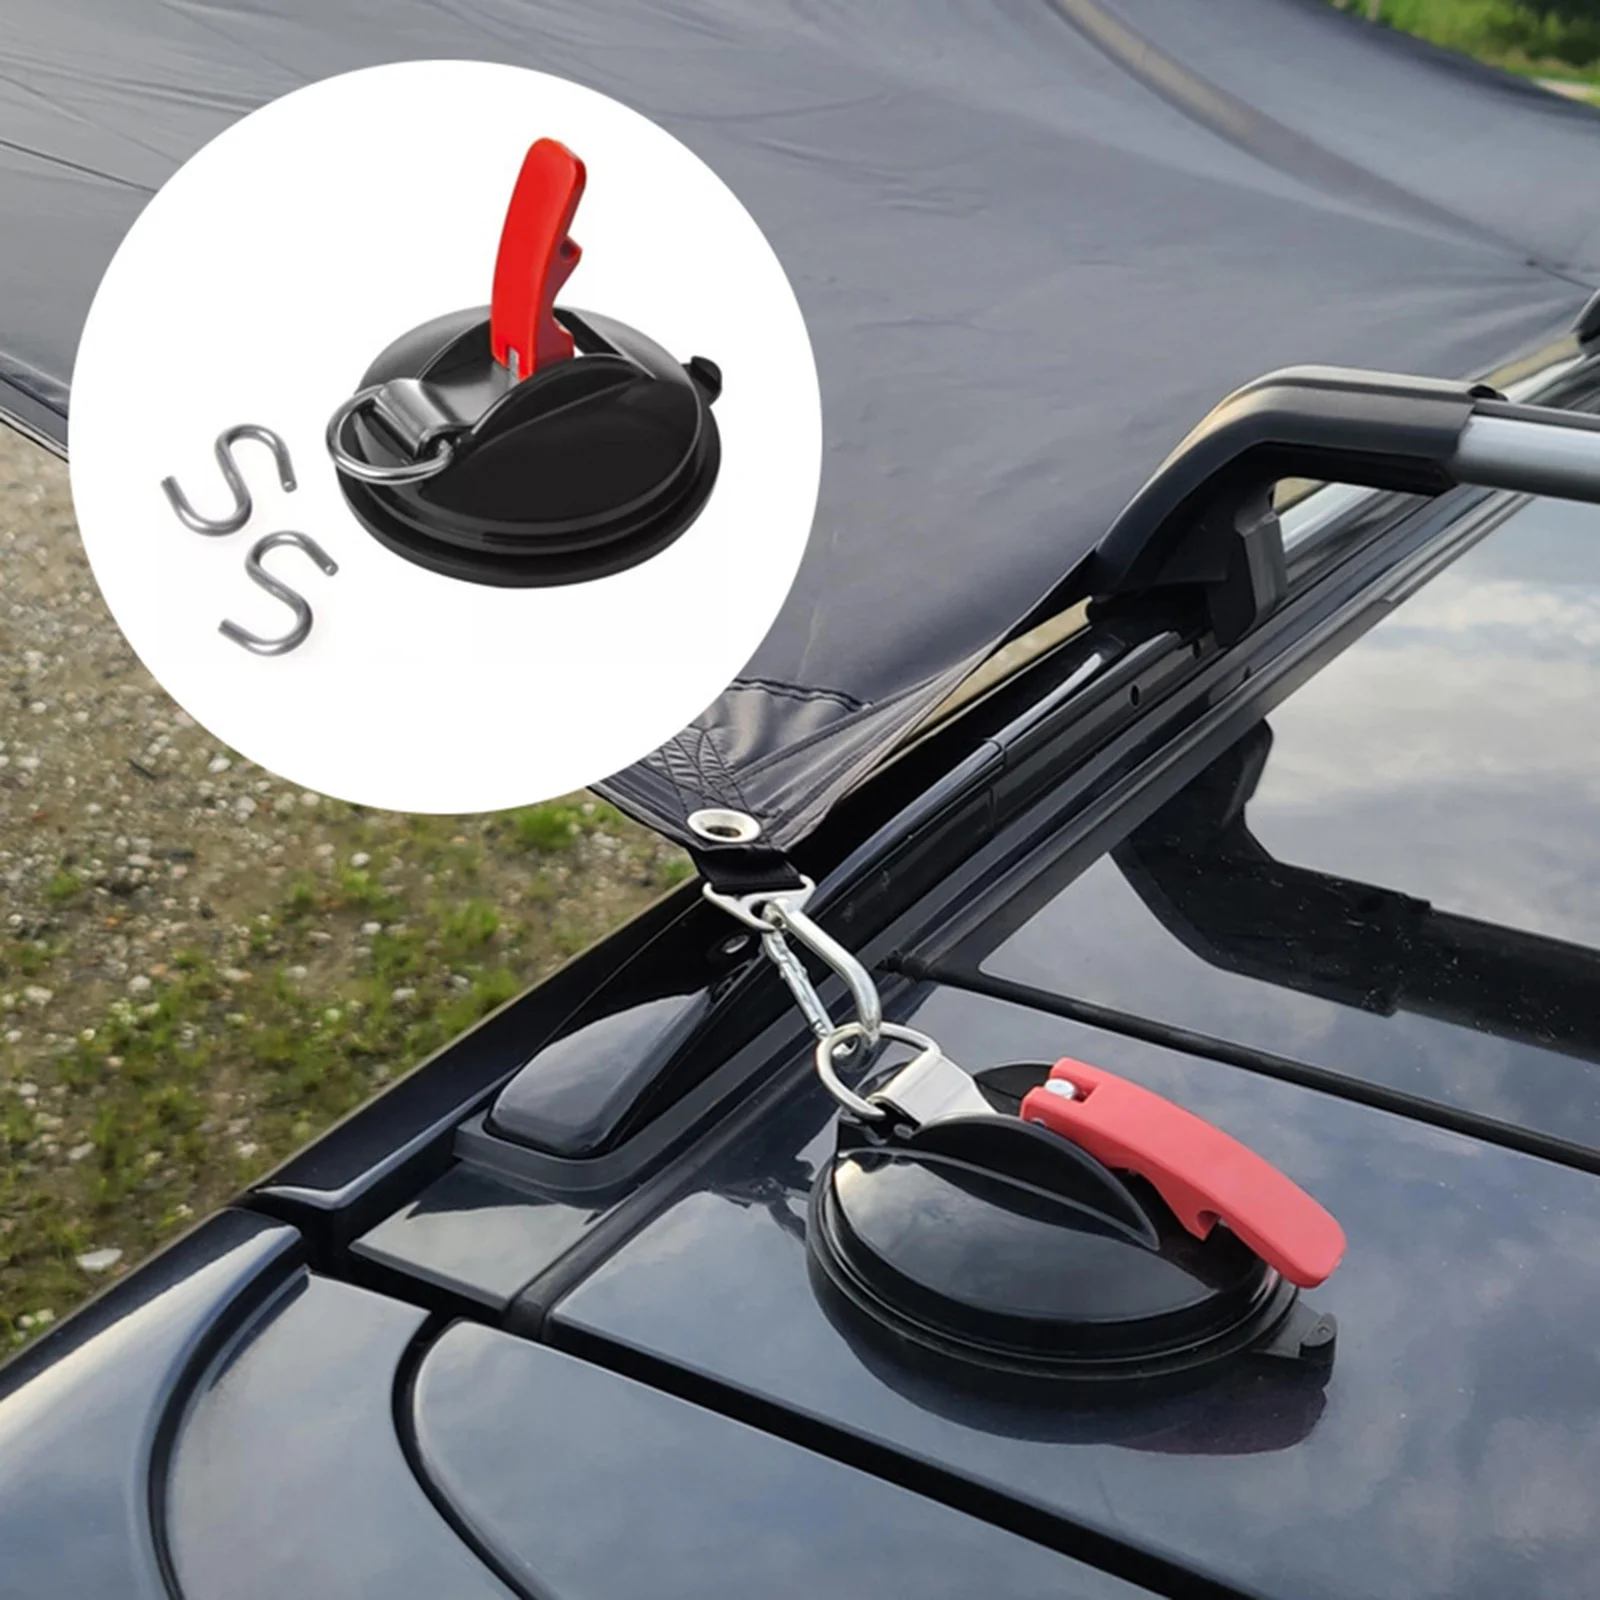 

Suction Cup Anchor Heavy Duty Tie Down Car Mount Luggage Tarps Tents with Securing Hook Universal for Car Truck Dropshipping